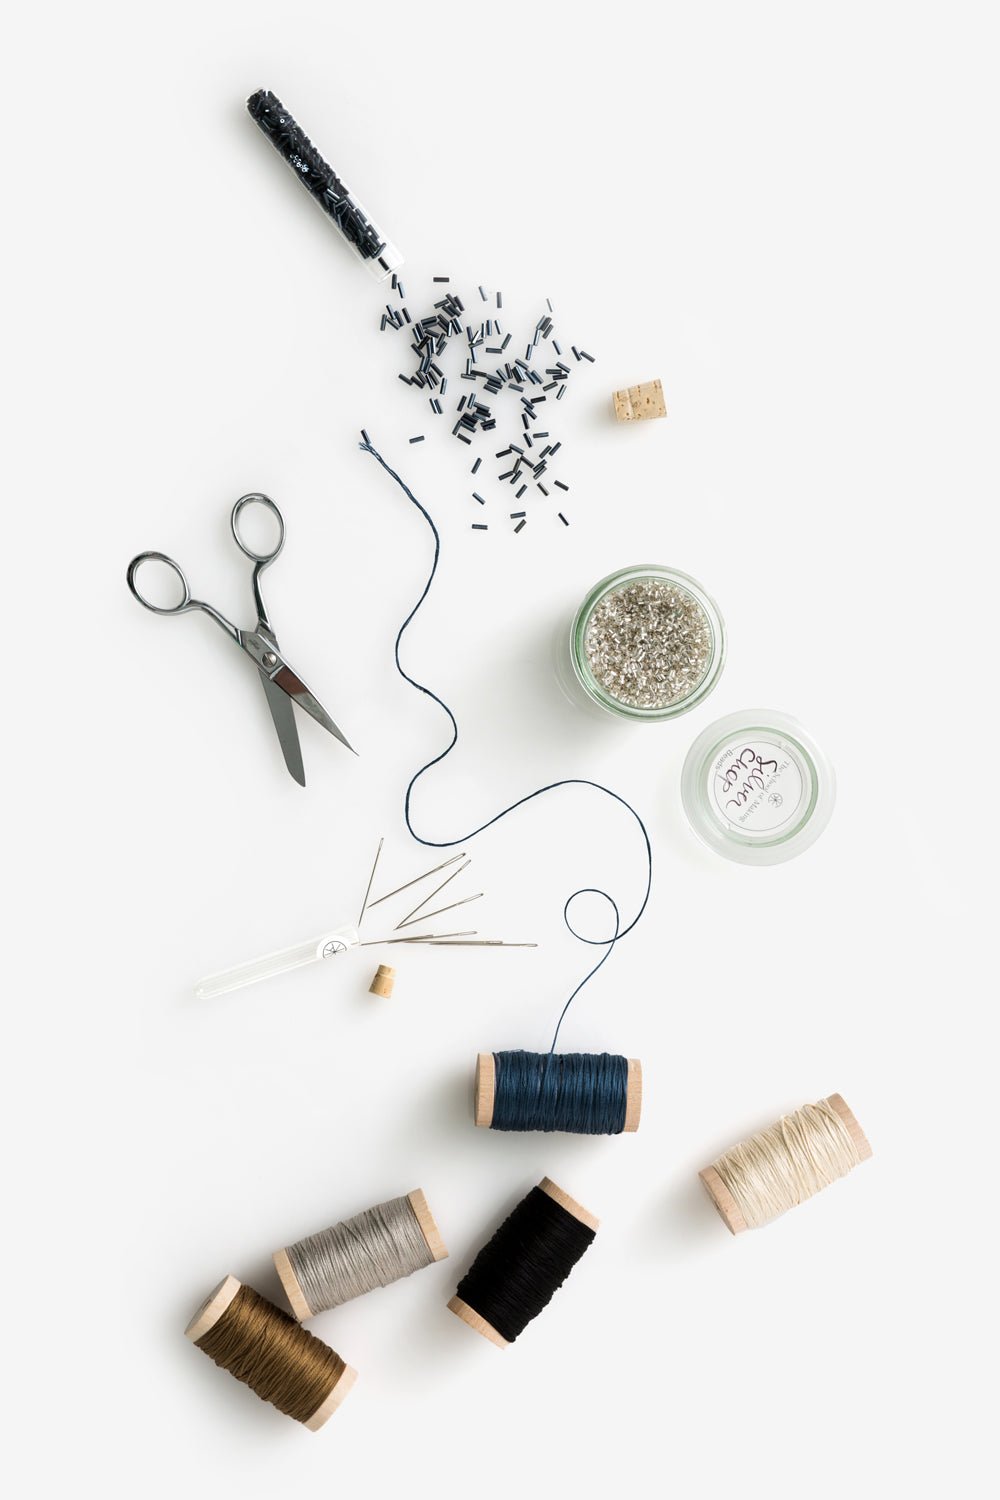 The School of Making Embroidery Floss on Wooden Spools and Maker Supplies